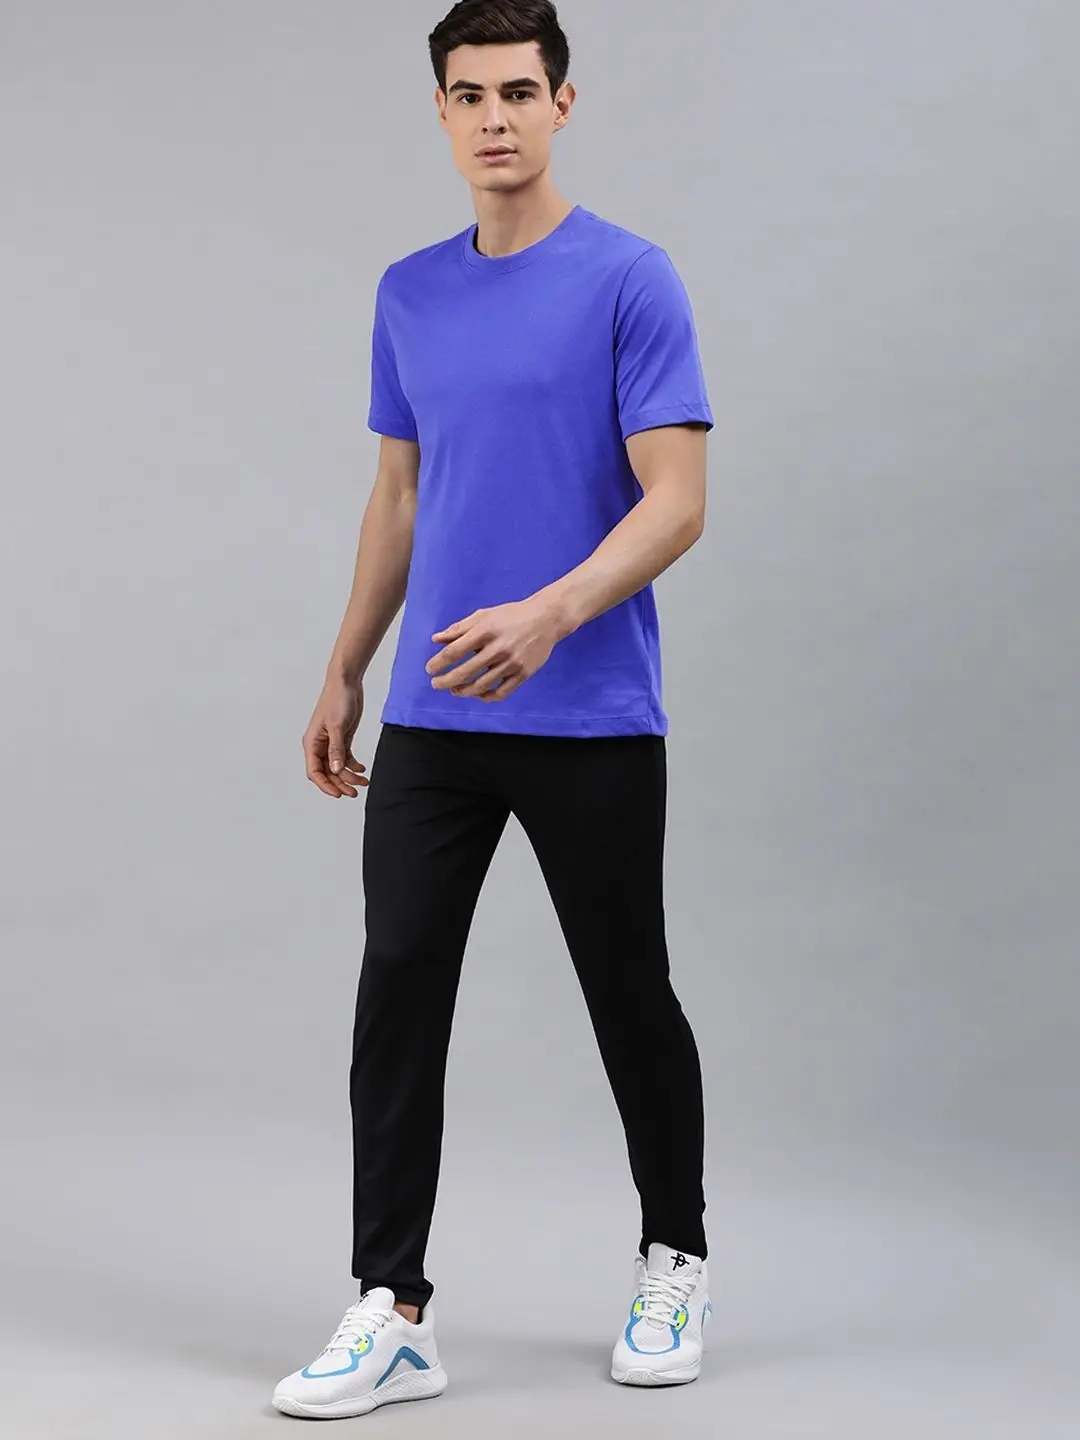 2023 Wholesale New Design Cotton Jogging Gym Loose Fit Oversized Tee ...